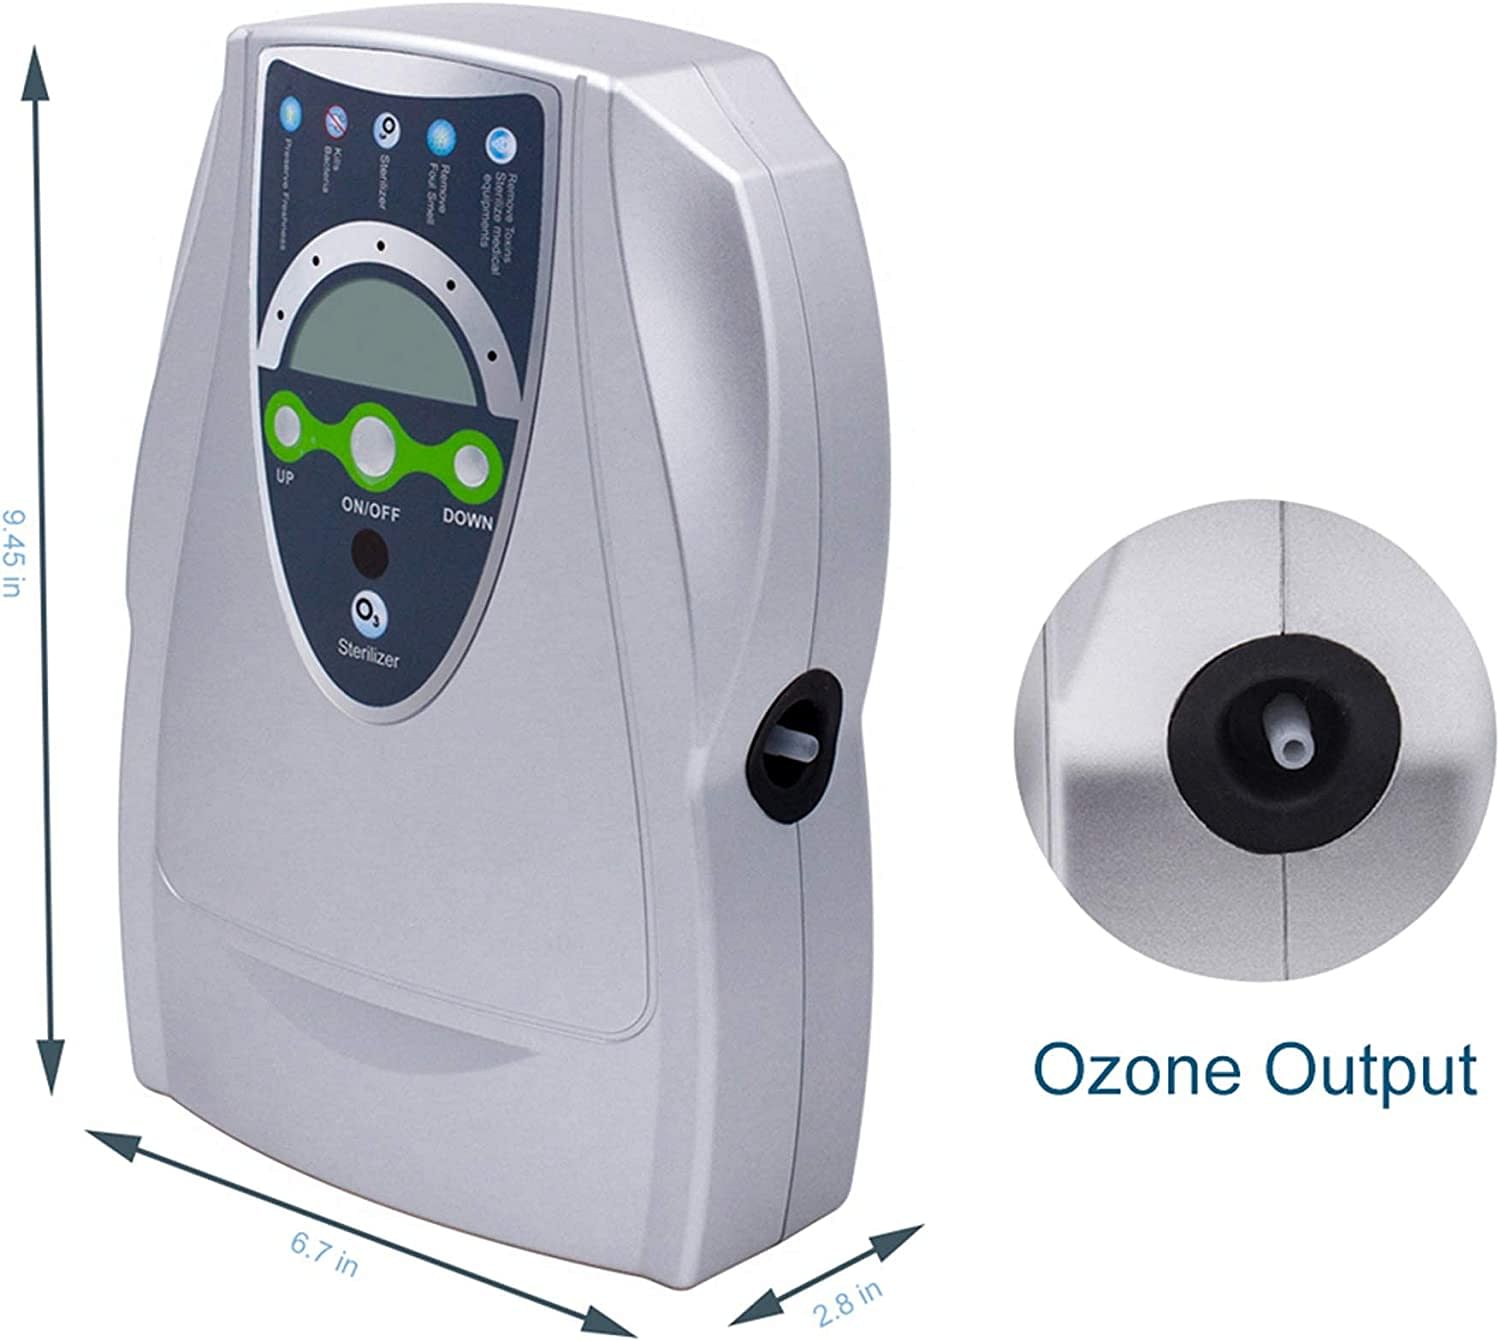 Ozone Odor Removal: An Effective Solution for Sewage Odors